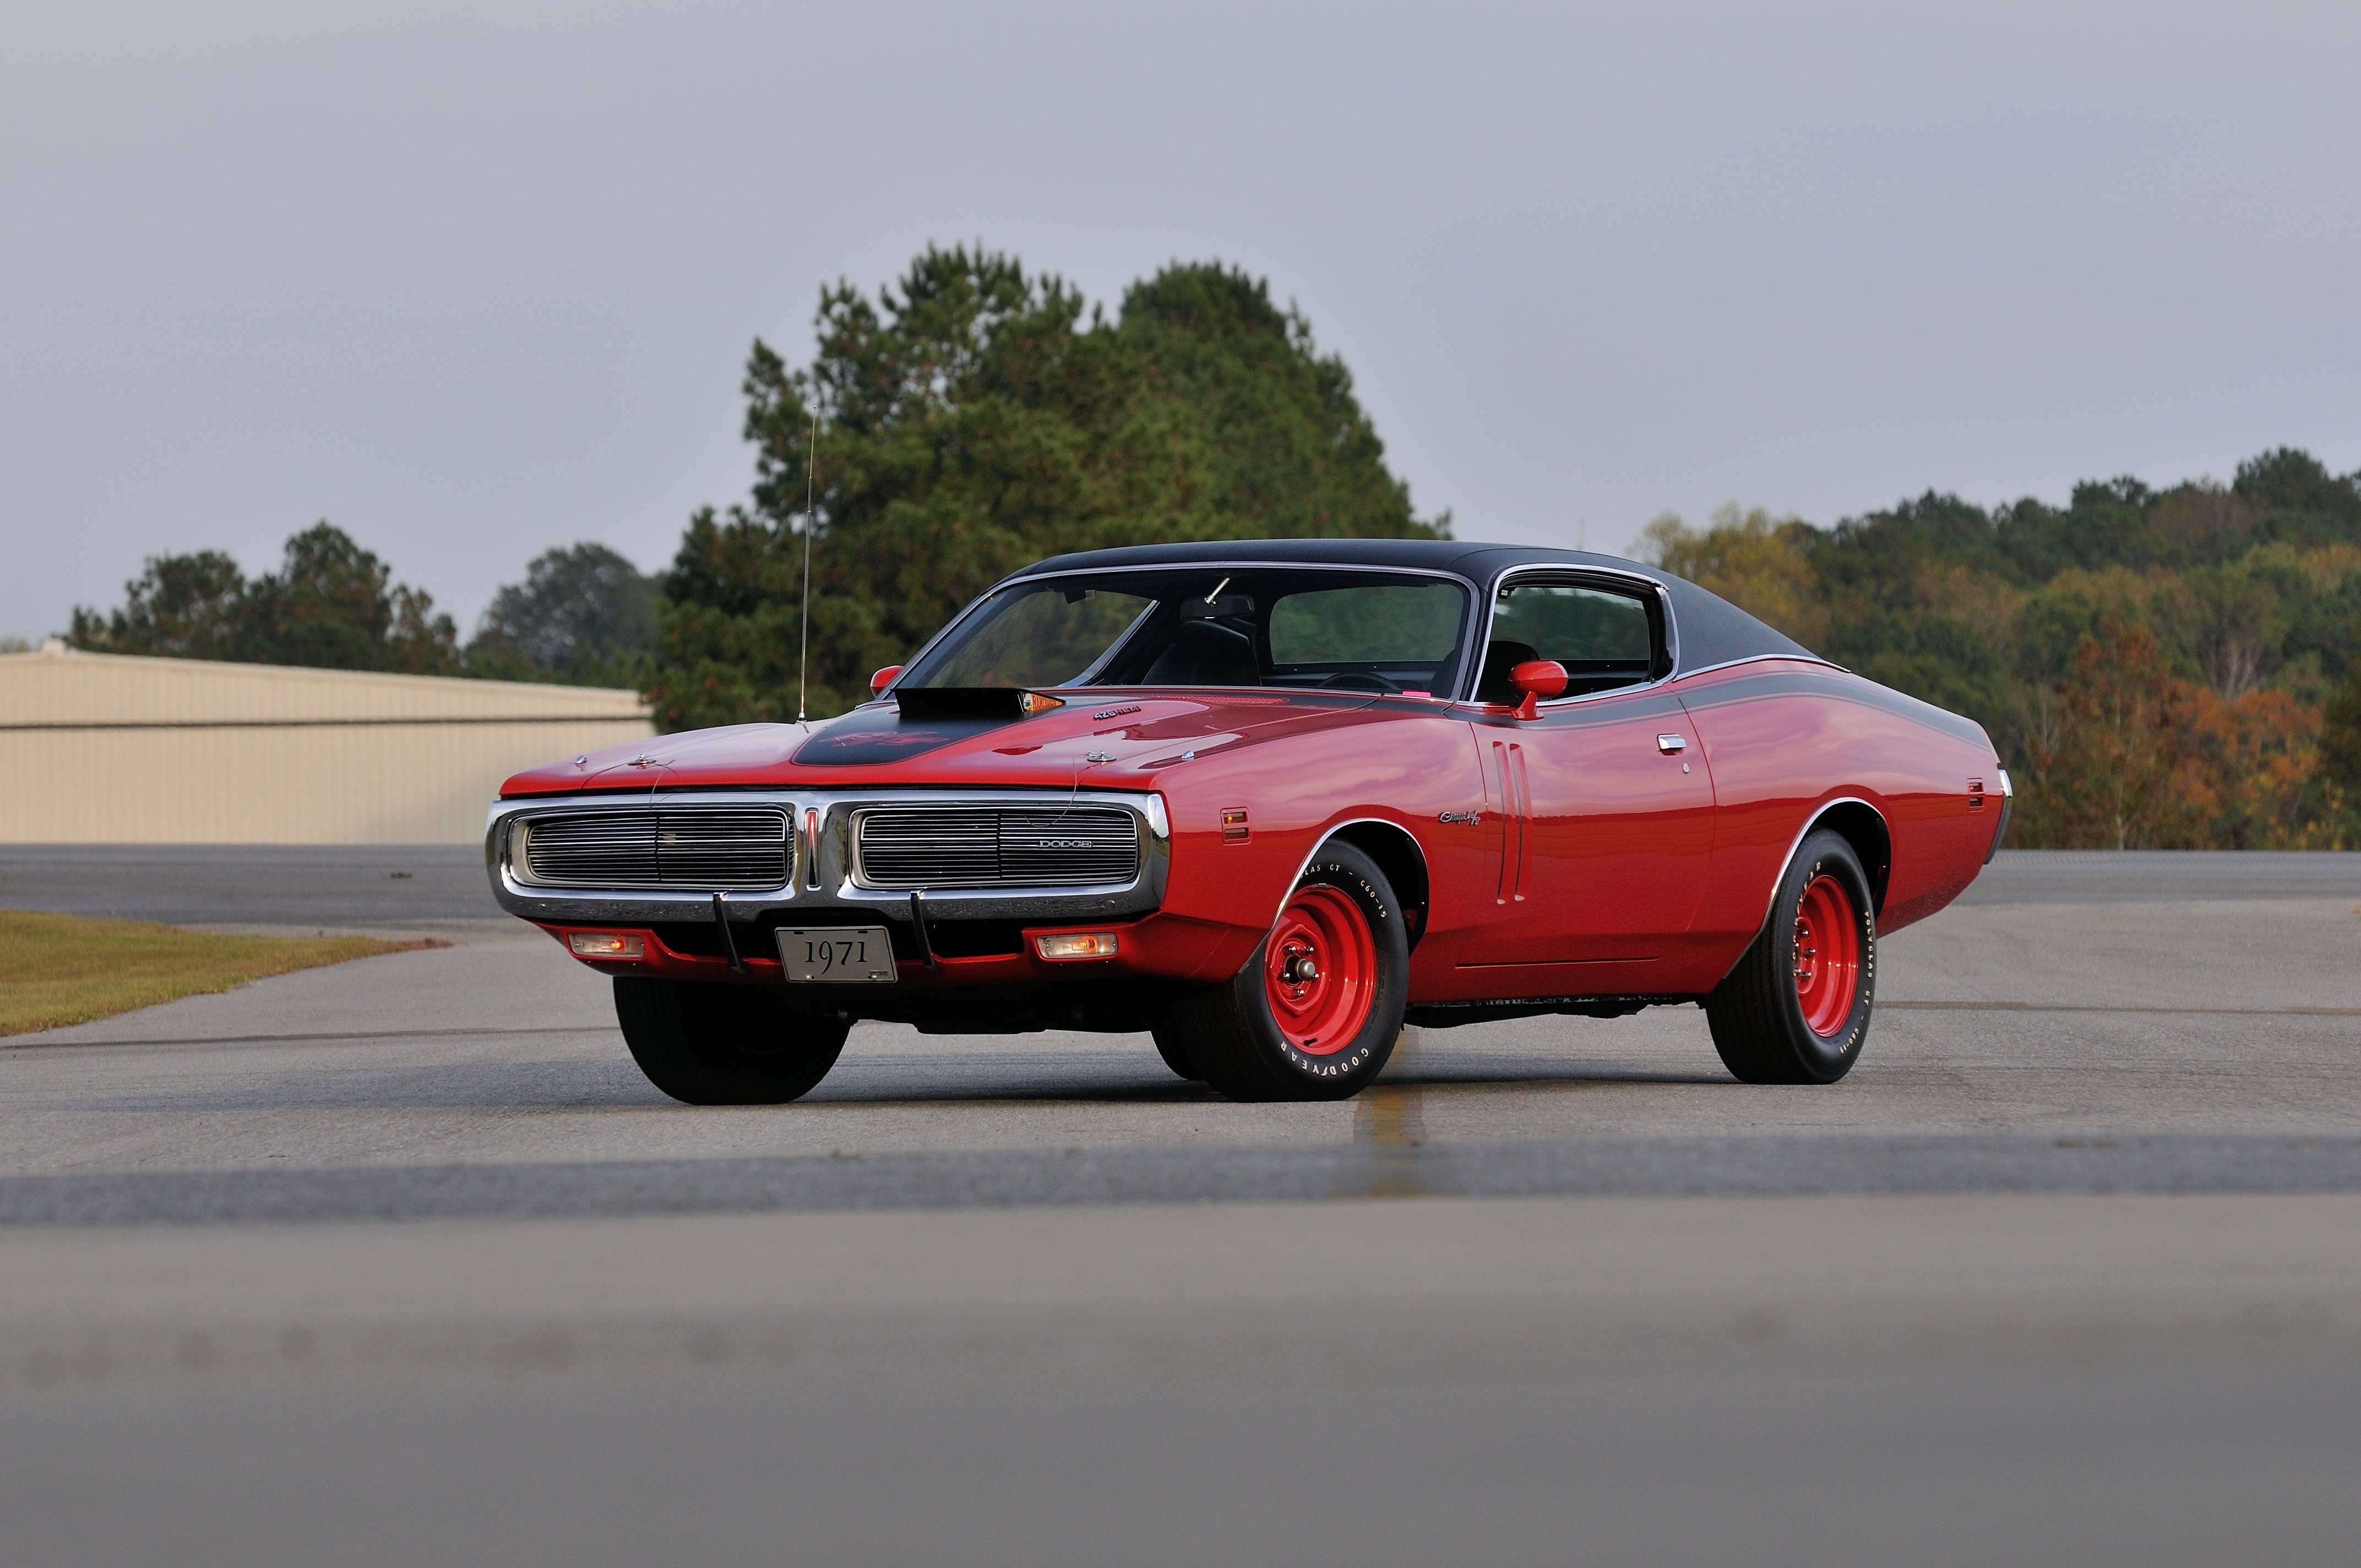 1971, Dodge, Hemi, Charger, Rt, Pilot, Car, Red, Muscle, Classic, Old, Usa, 4288x2848 01 Wallpaper